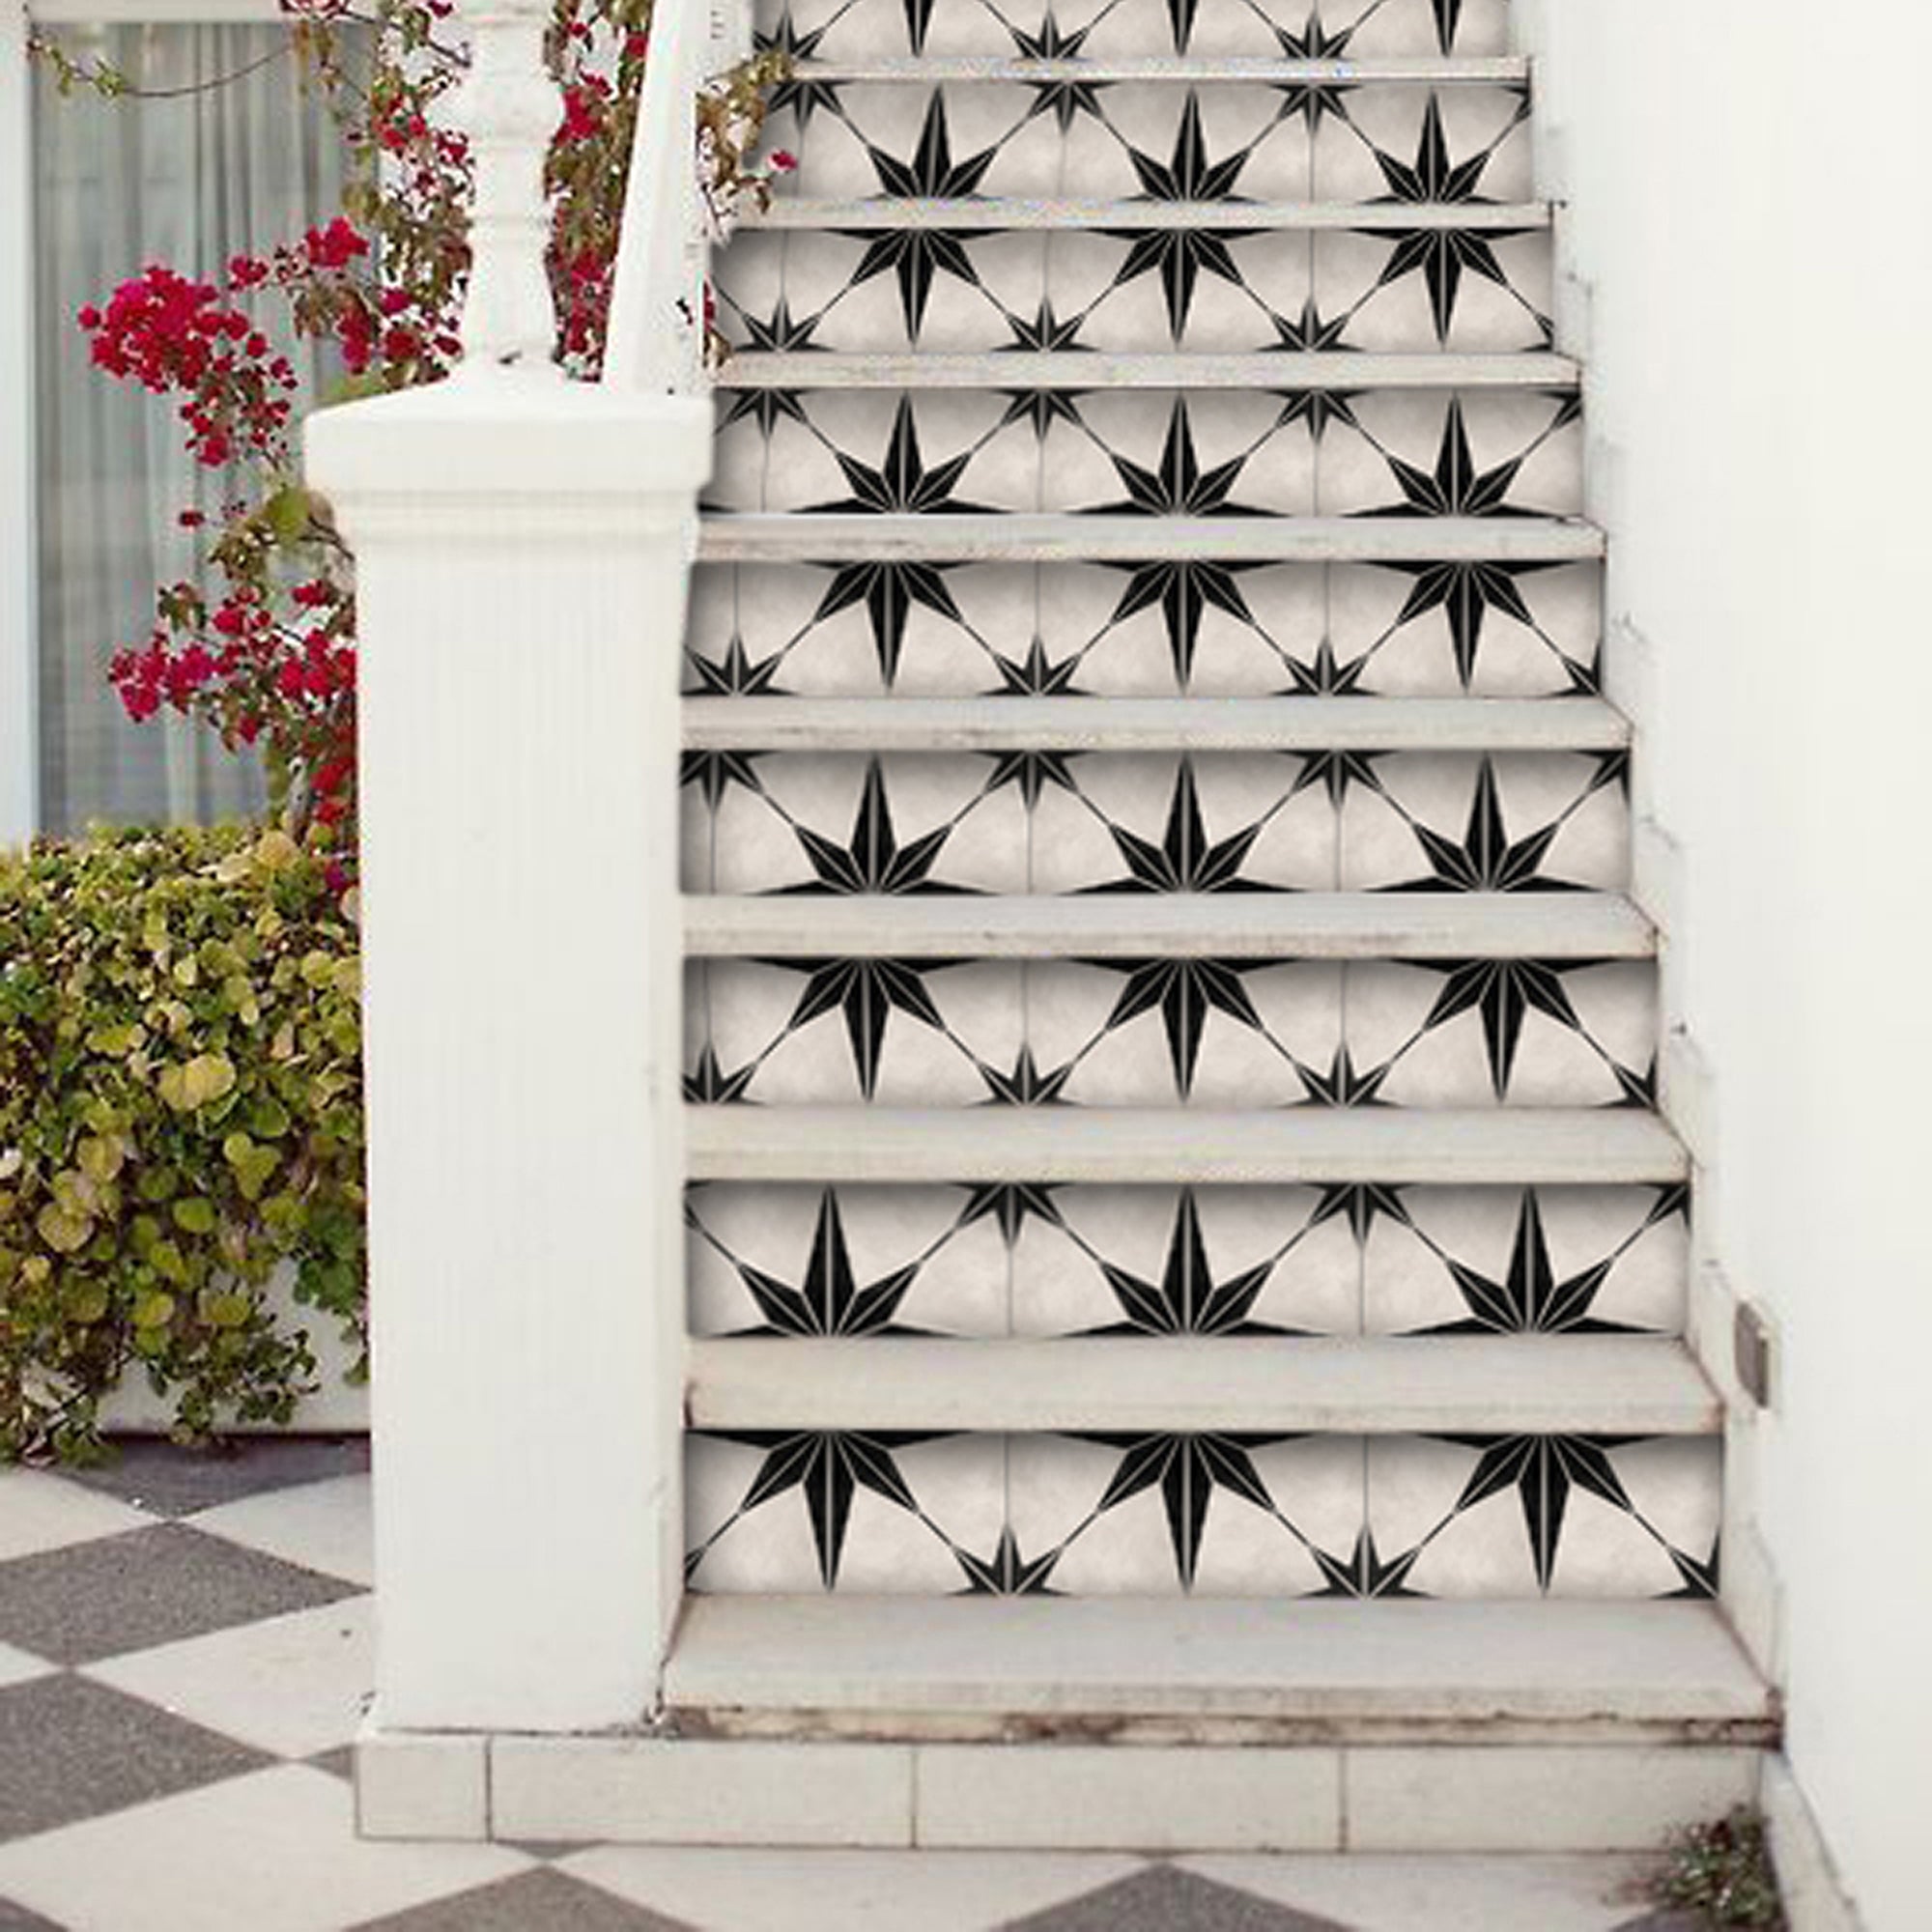 PROMO! Astra in Black Stair Riser Stickers - 7 strips in 7" height x 48" long